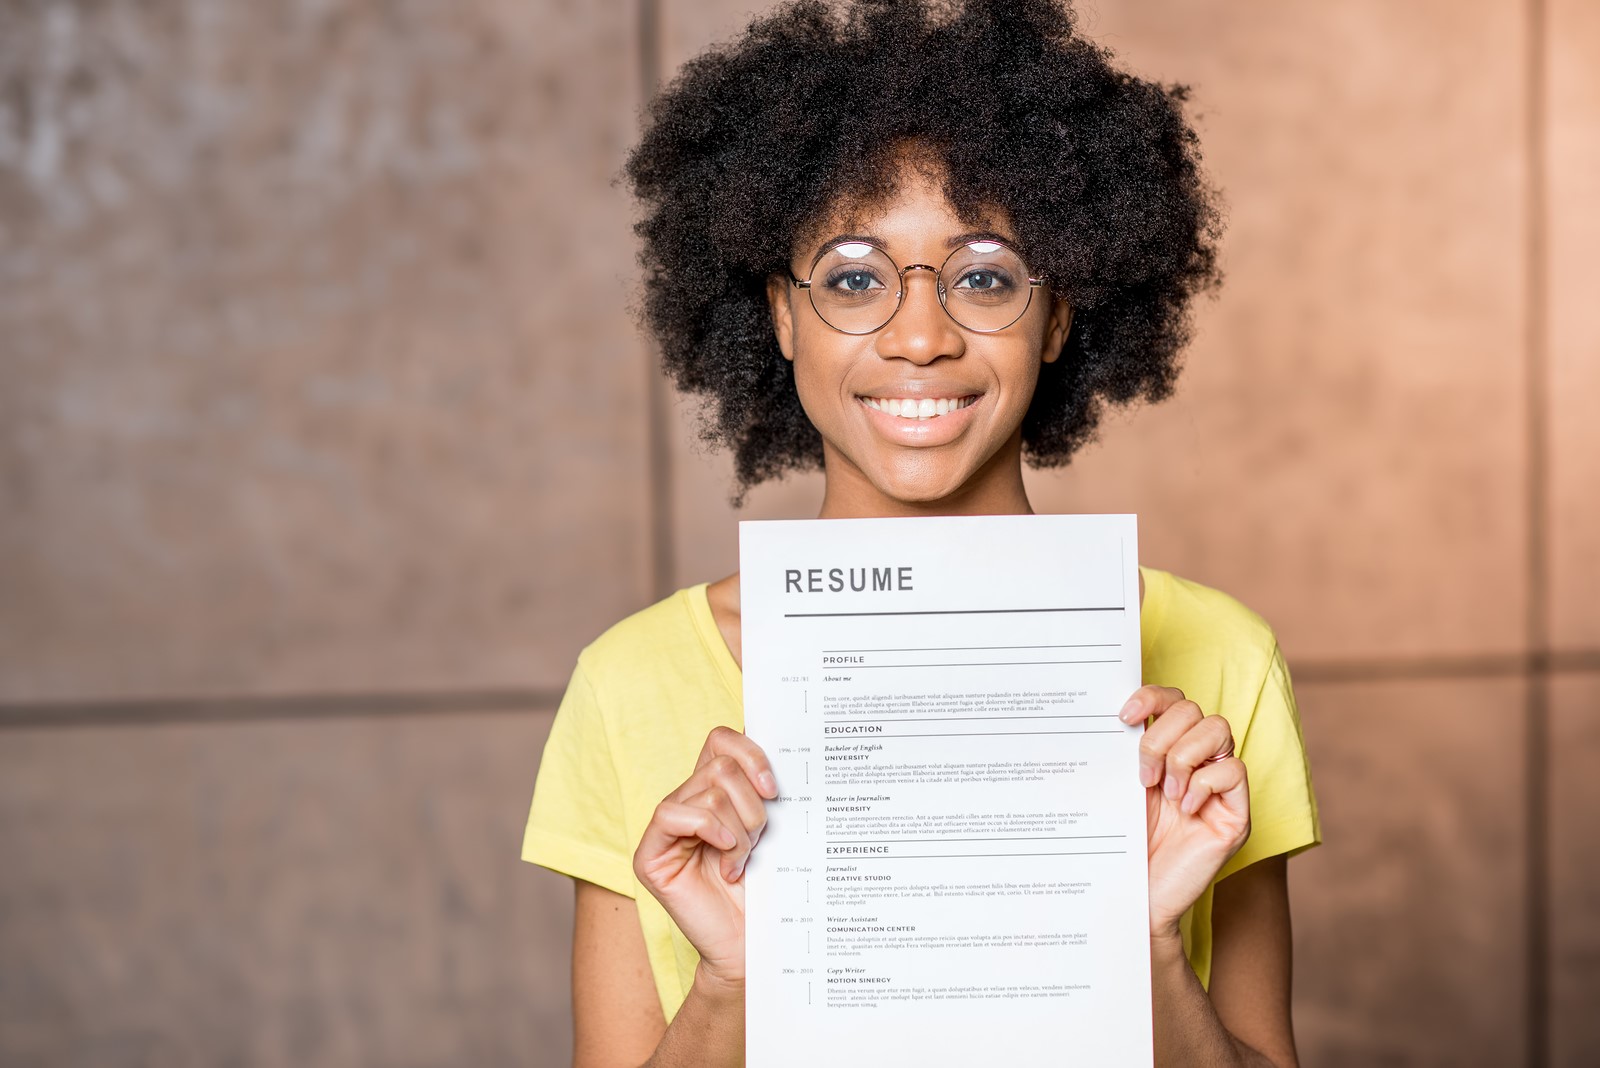 easy and creative ways to improve your resume